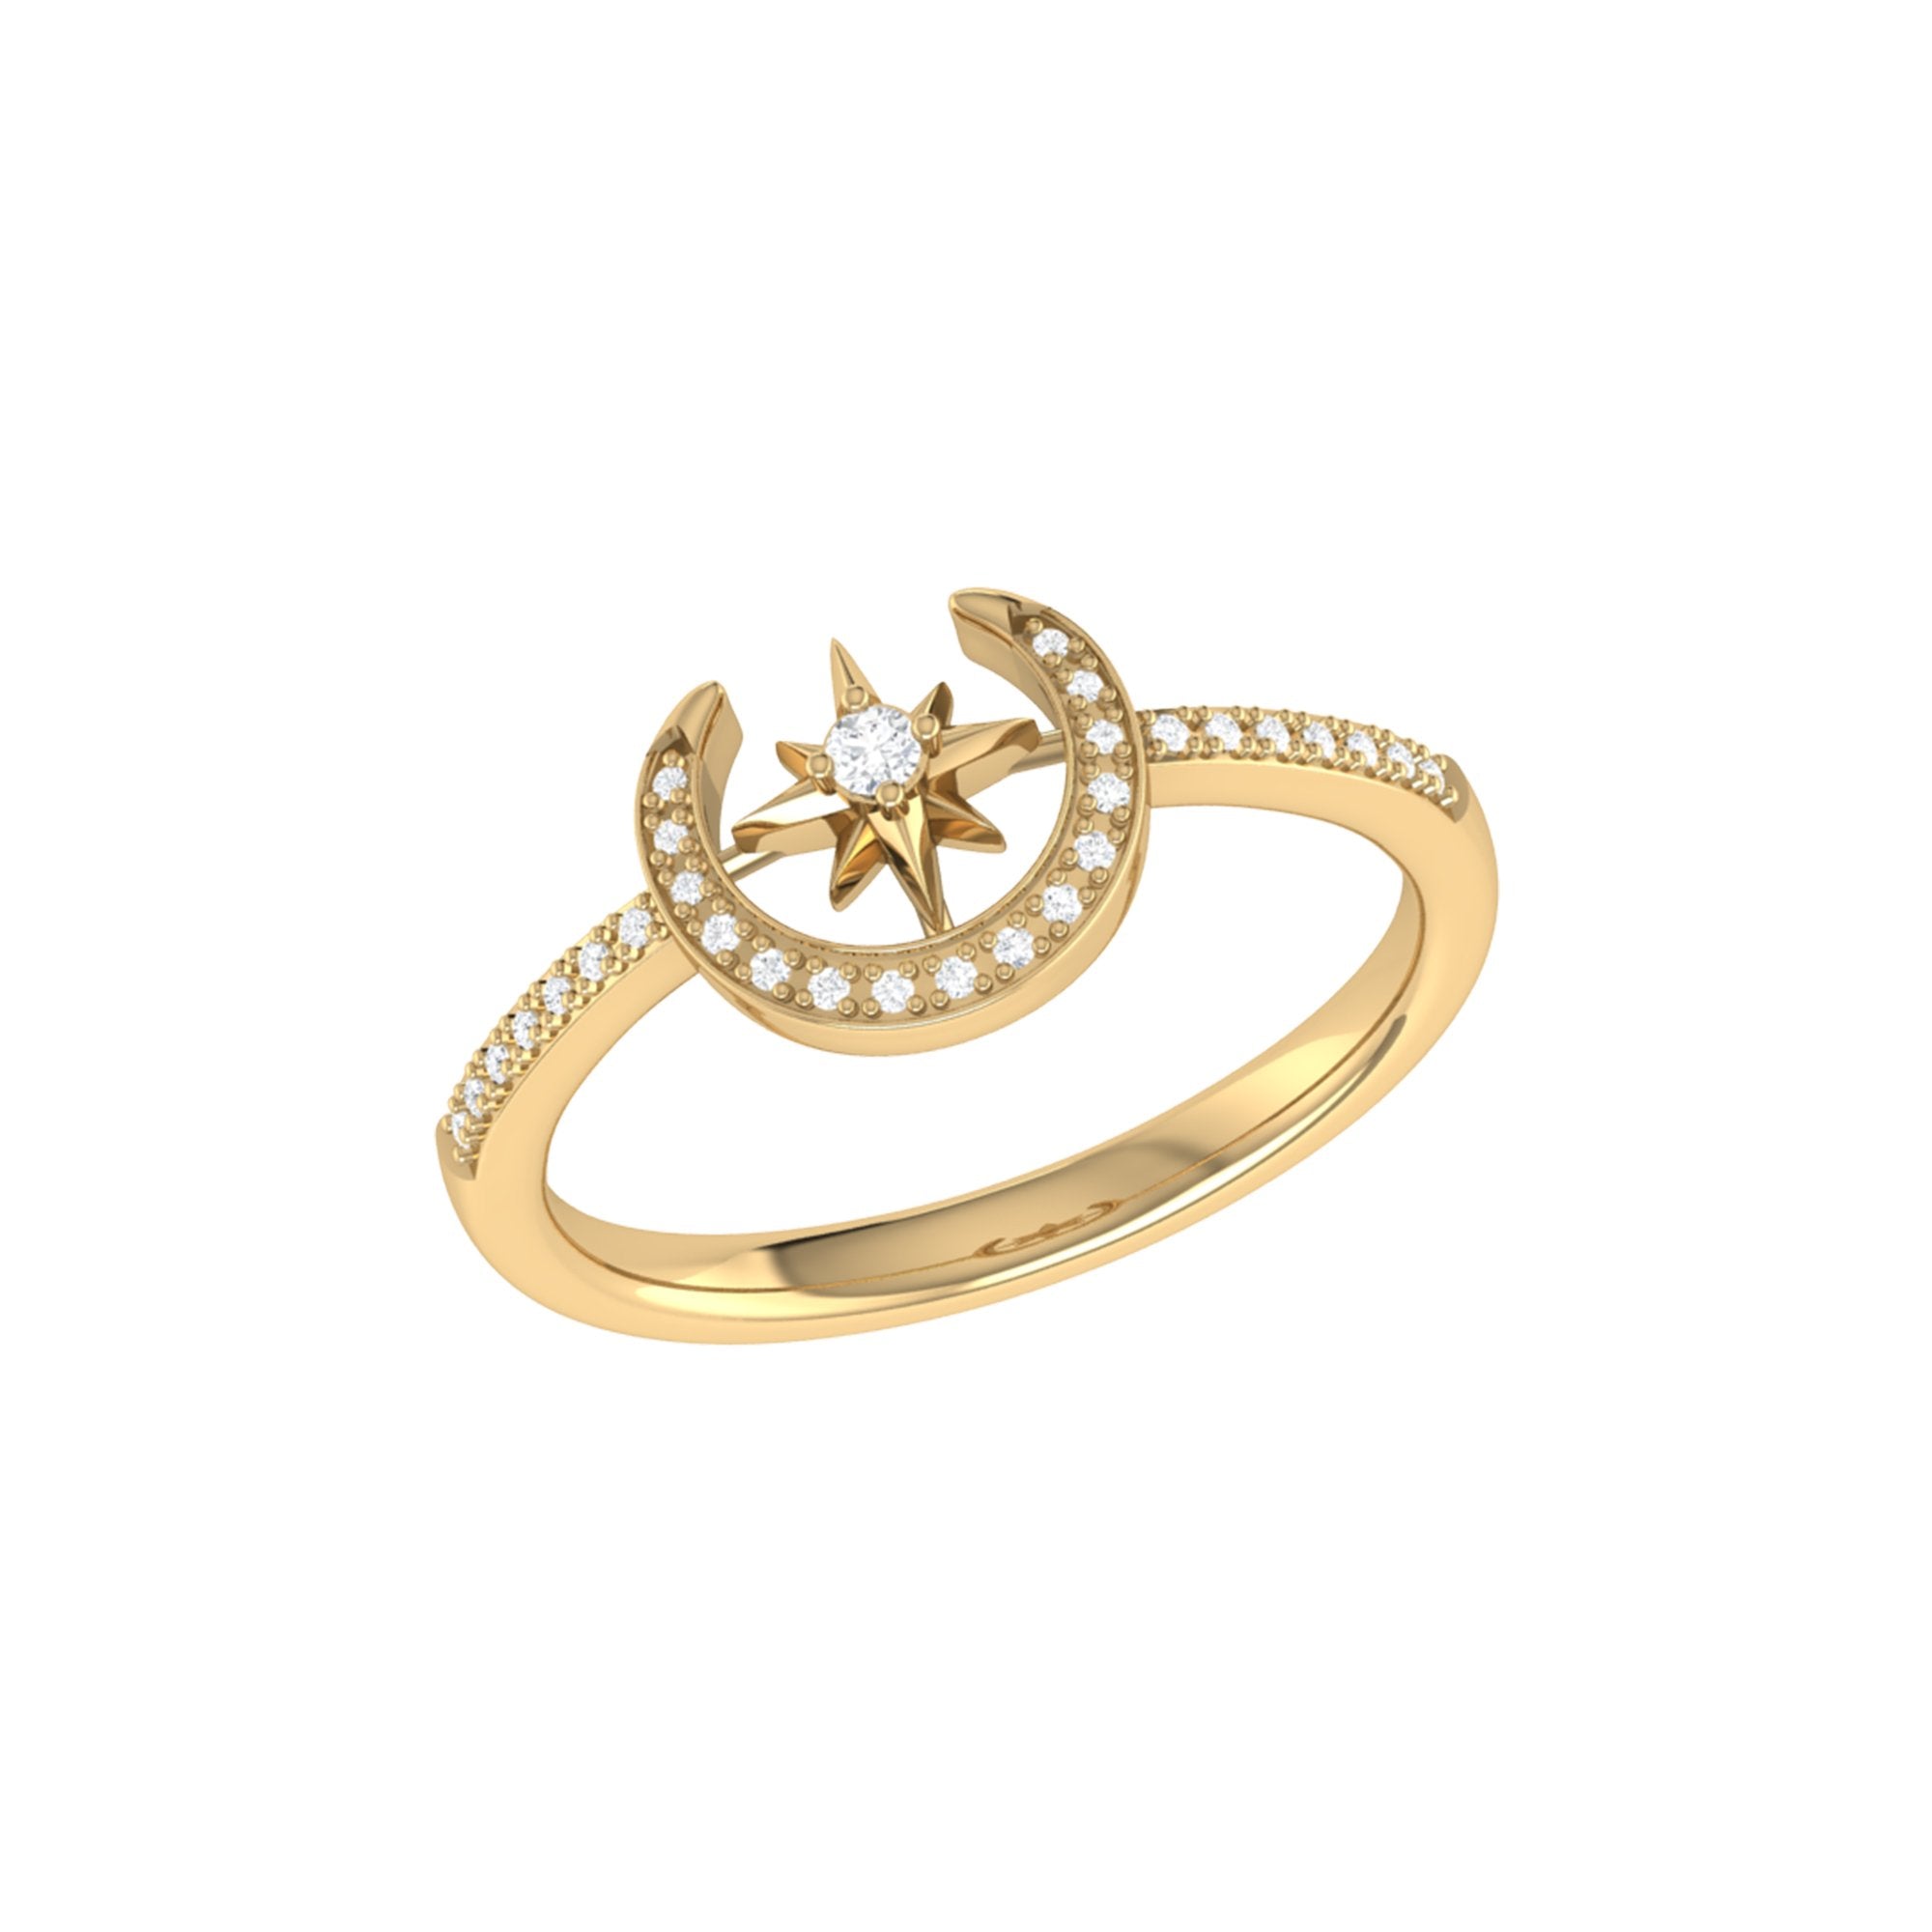 Crescent North Star Diamond Ring in 14K Yellow Gold